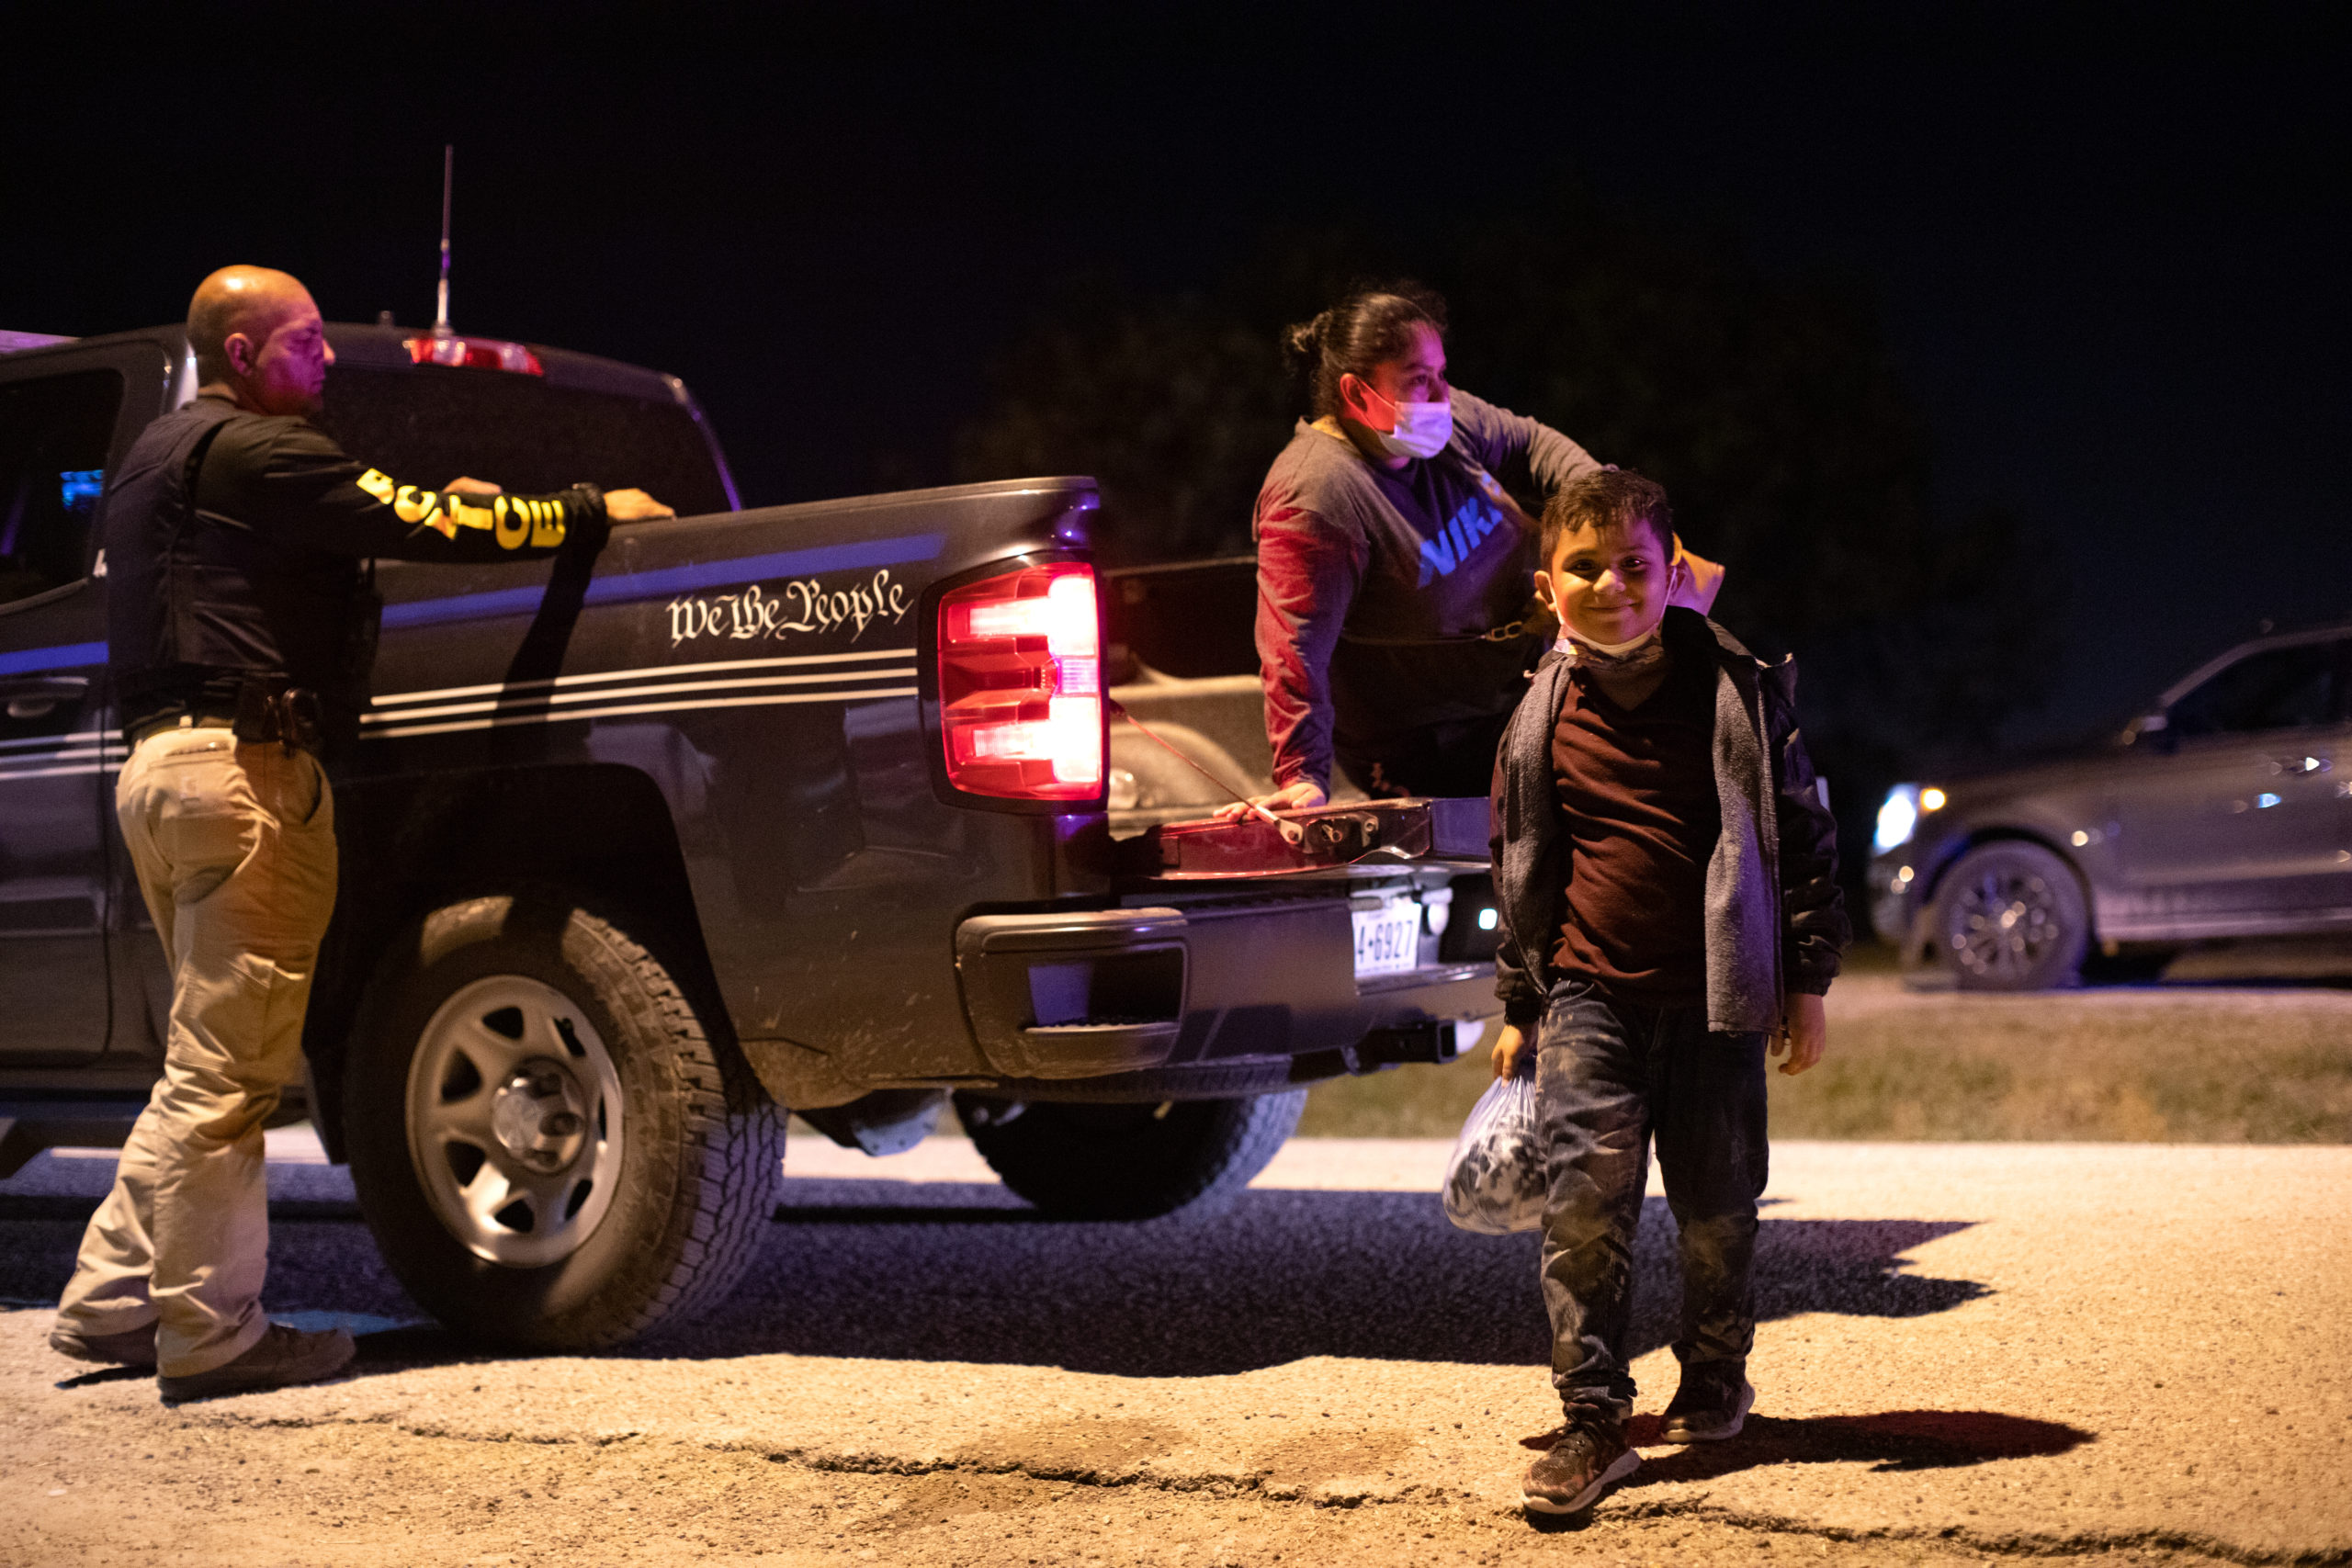 Migrants turned themselves in to Customs and Border Protection officials to be processed in hopes of applying for asylum near La Joya, Texas, on August 7, 2021. (Kaylee Greenlee - Daily Caller News Foundation)